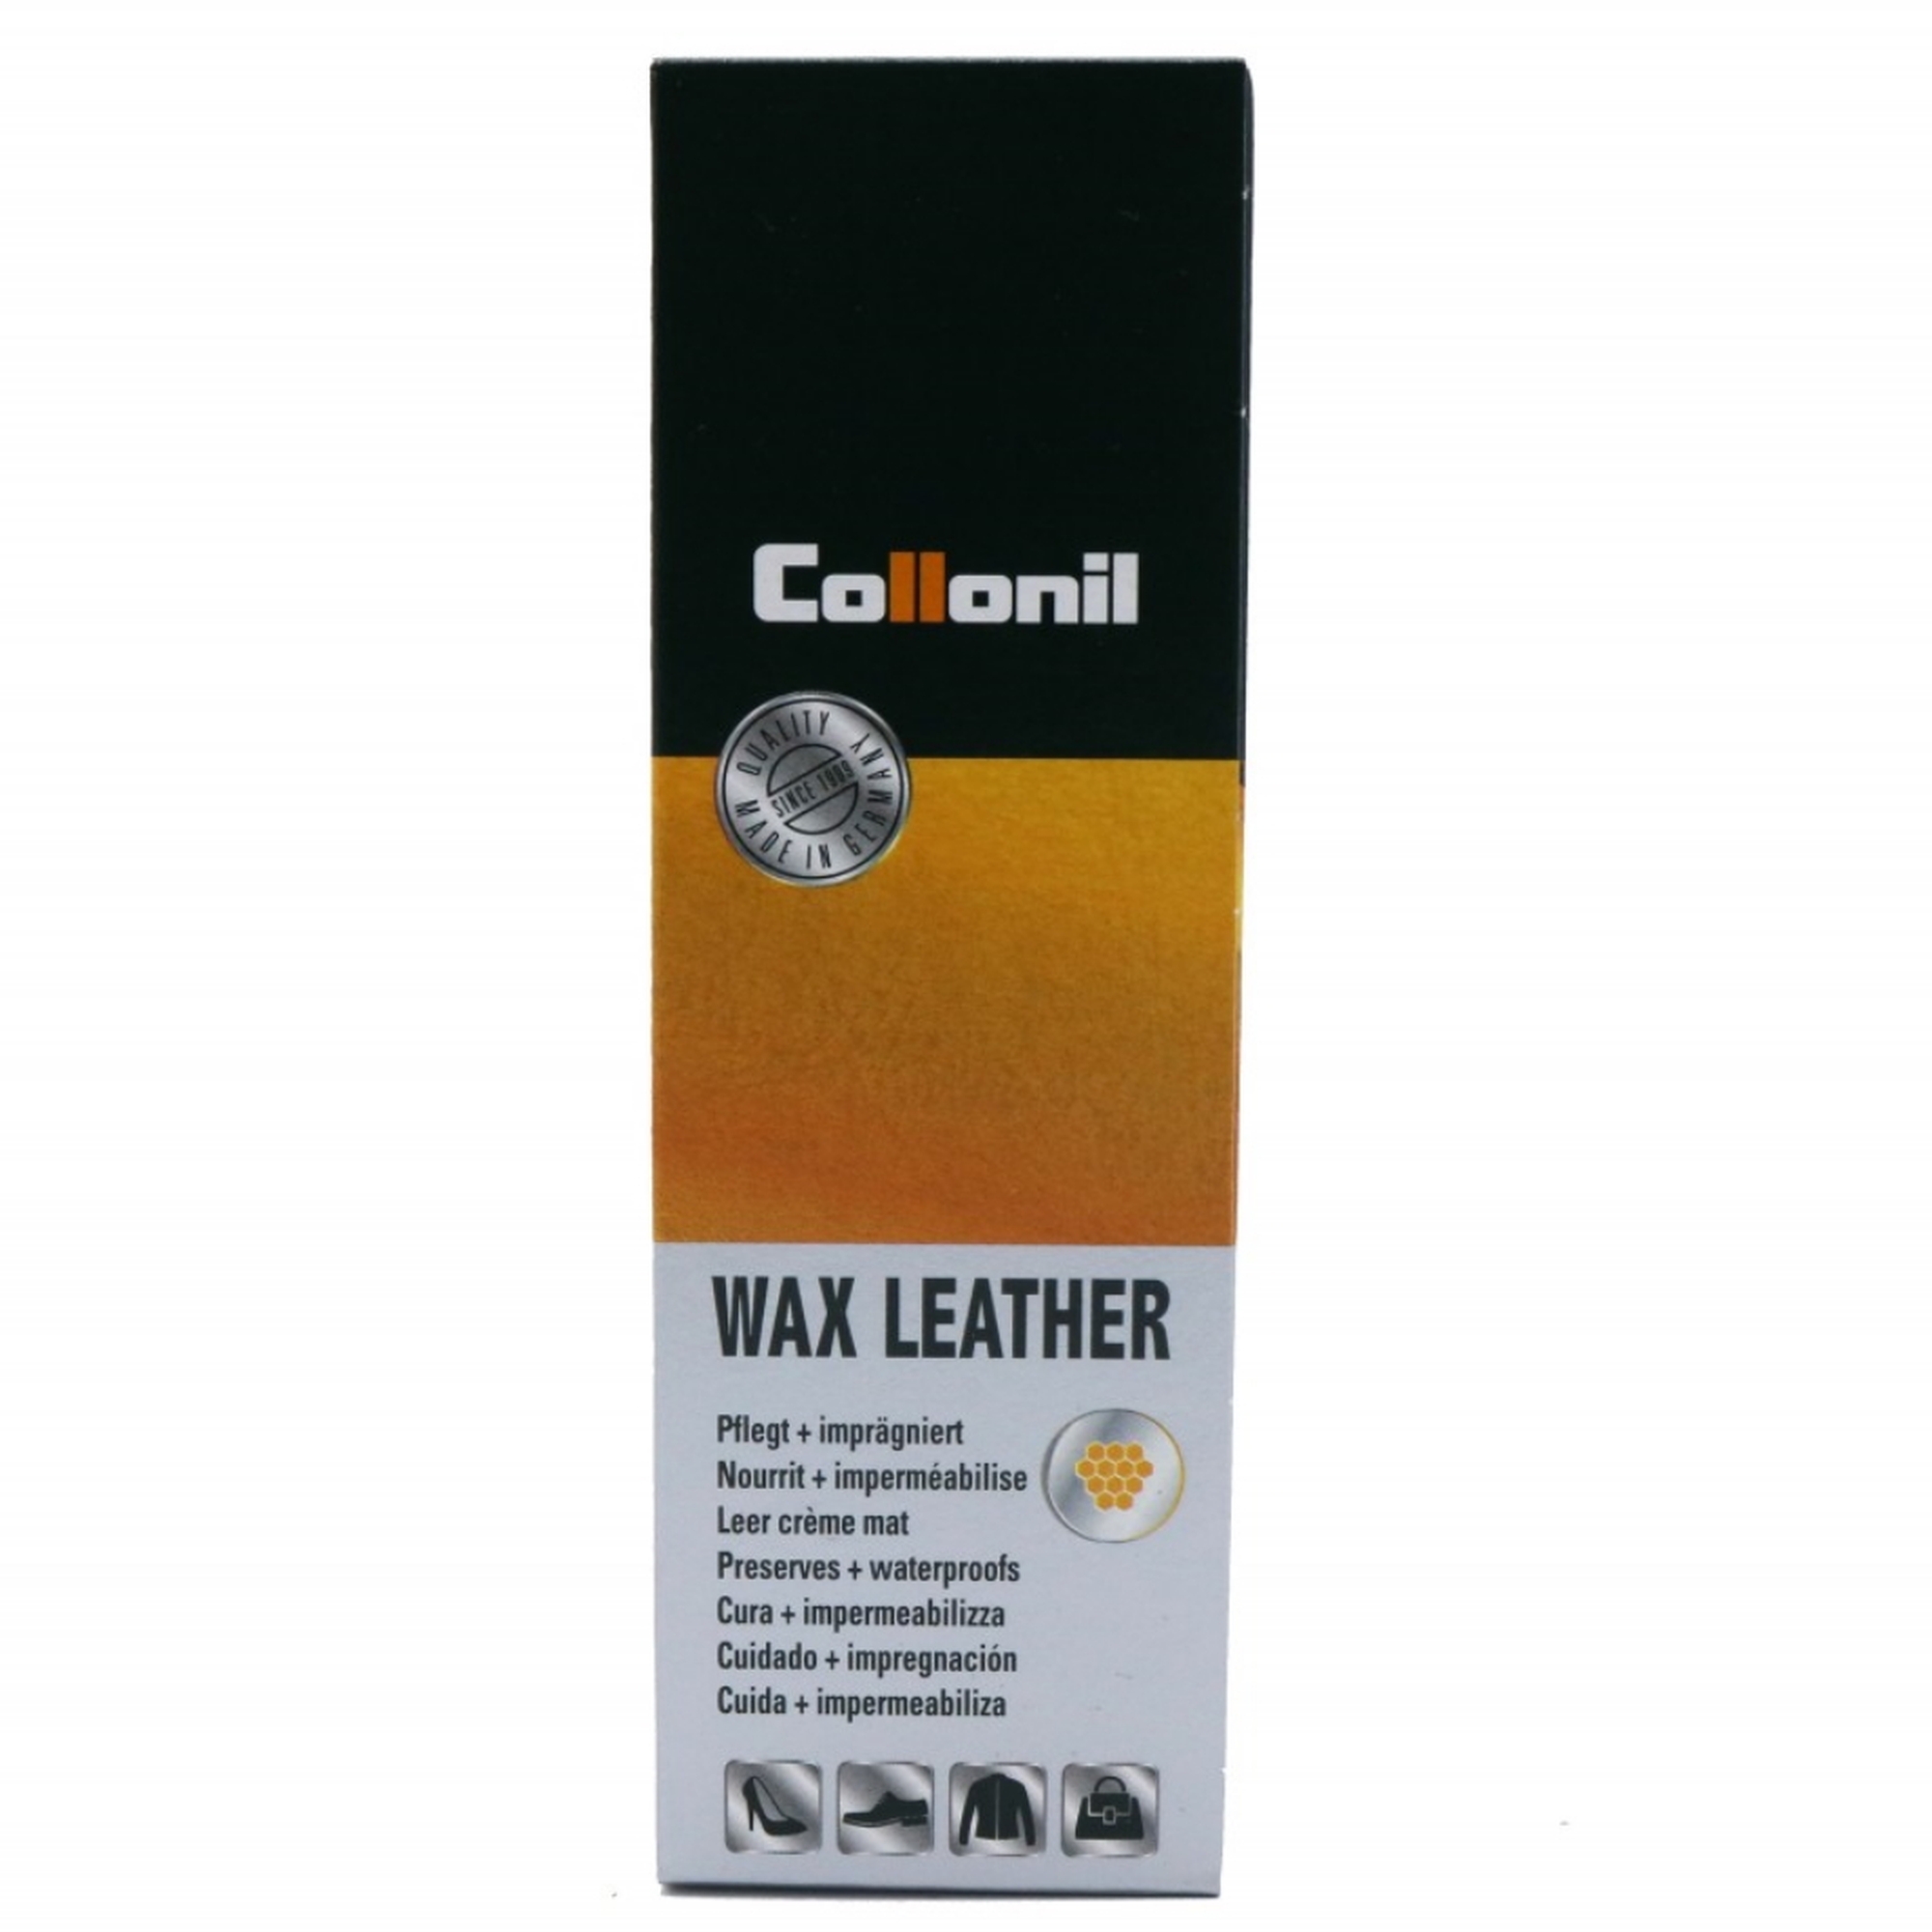 Collonil Wax Leather Tube 050 Neutral